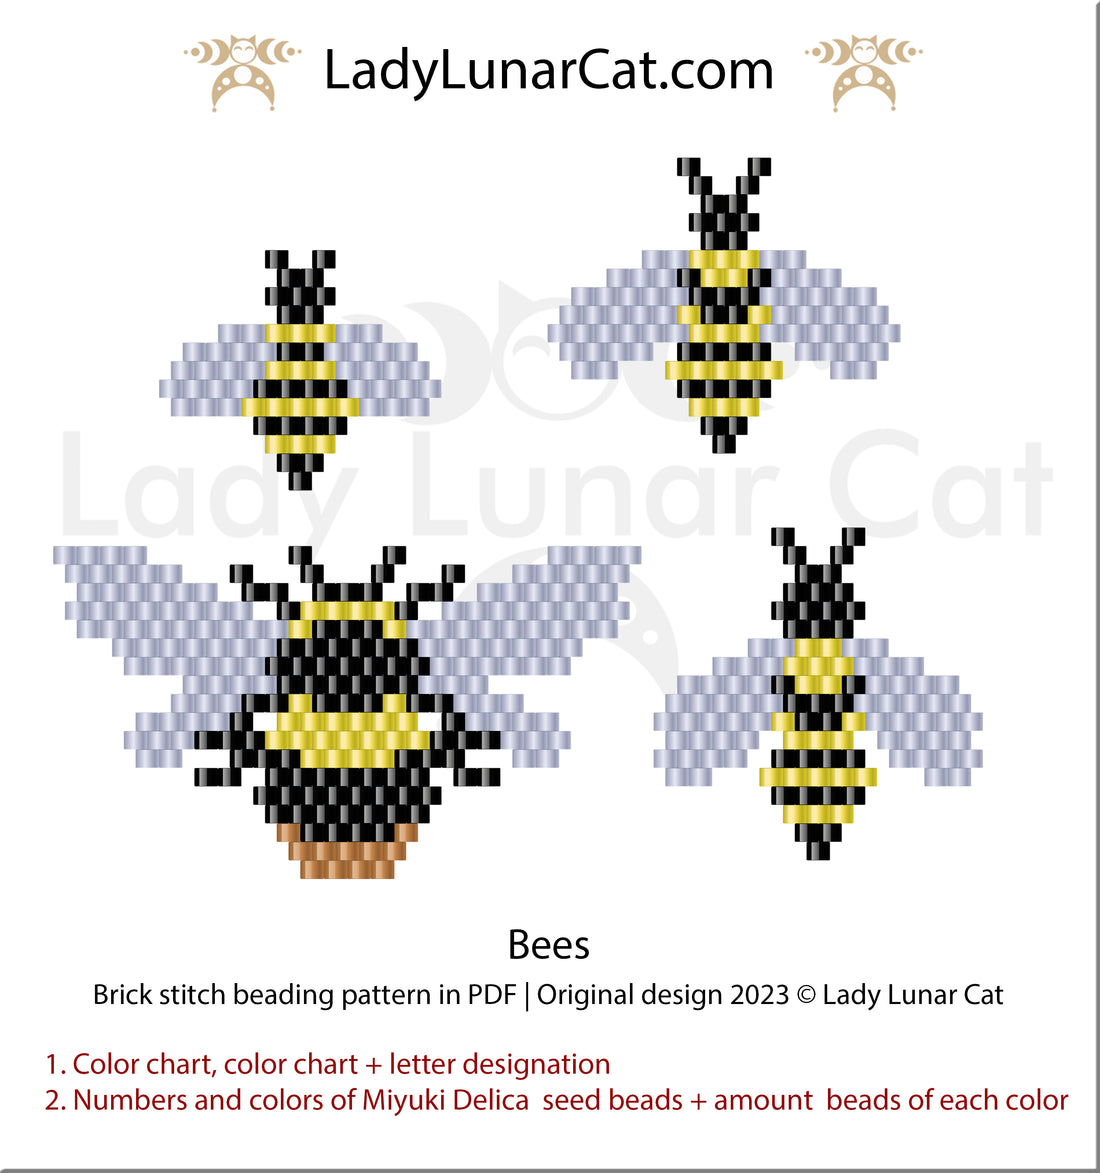 FREE Brick stitch pattern for beading Bees by Lady Lunar Cat LadyLunarCat